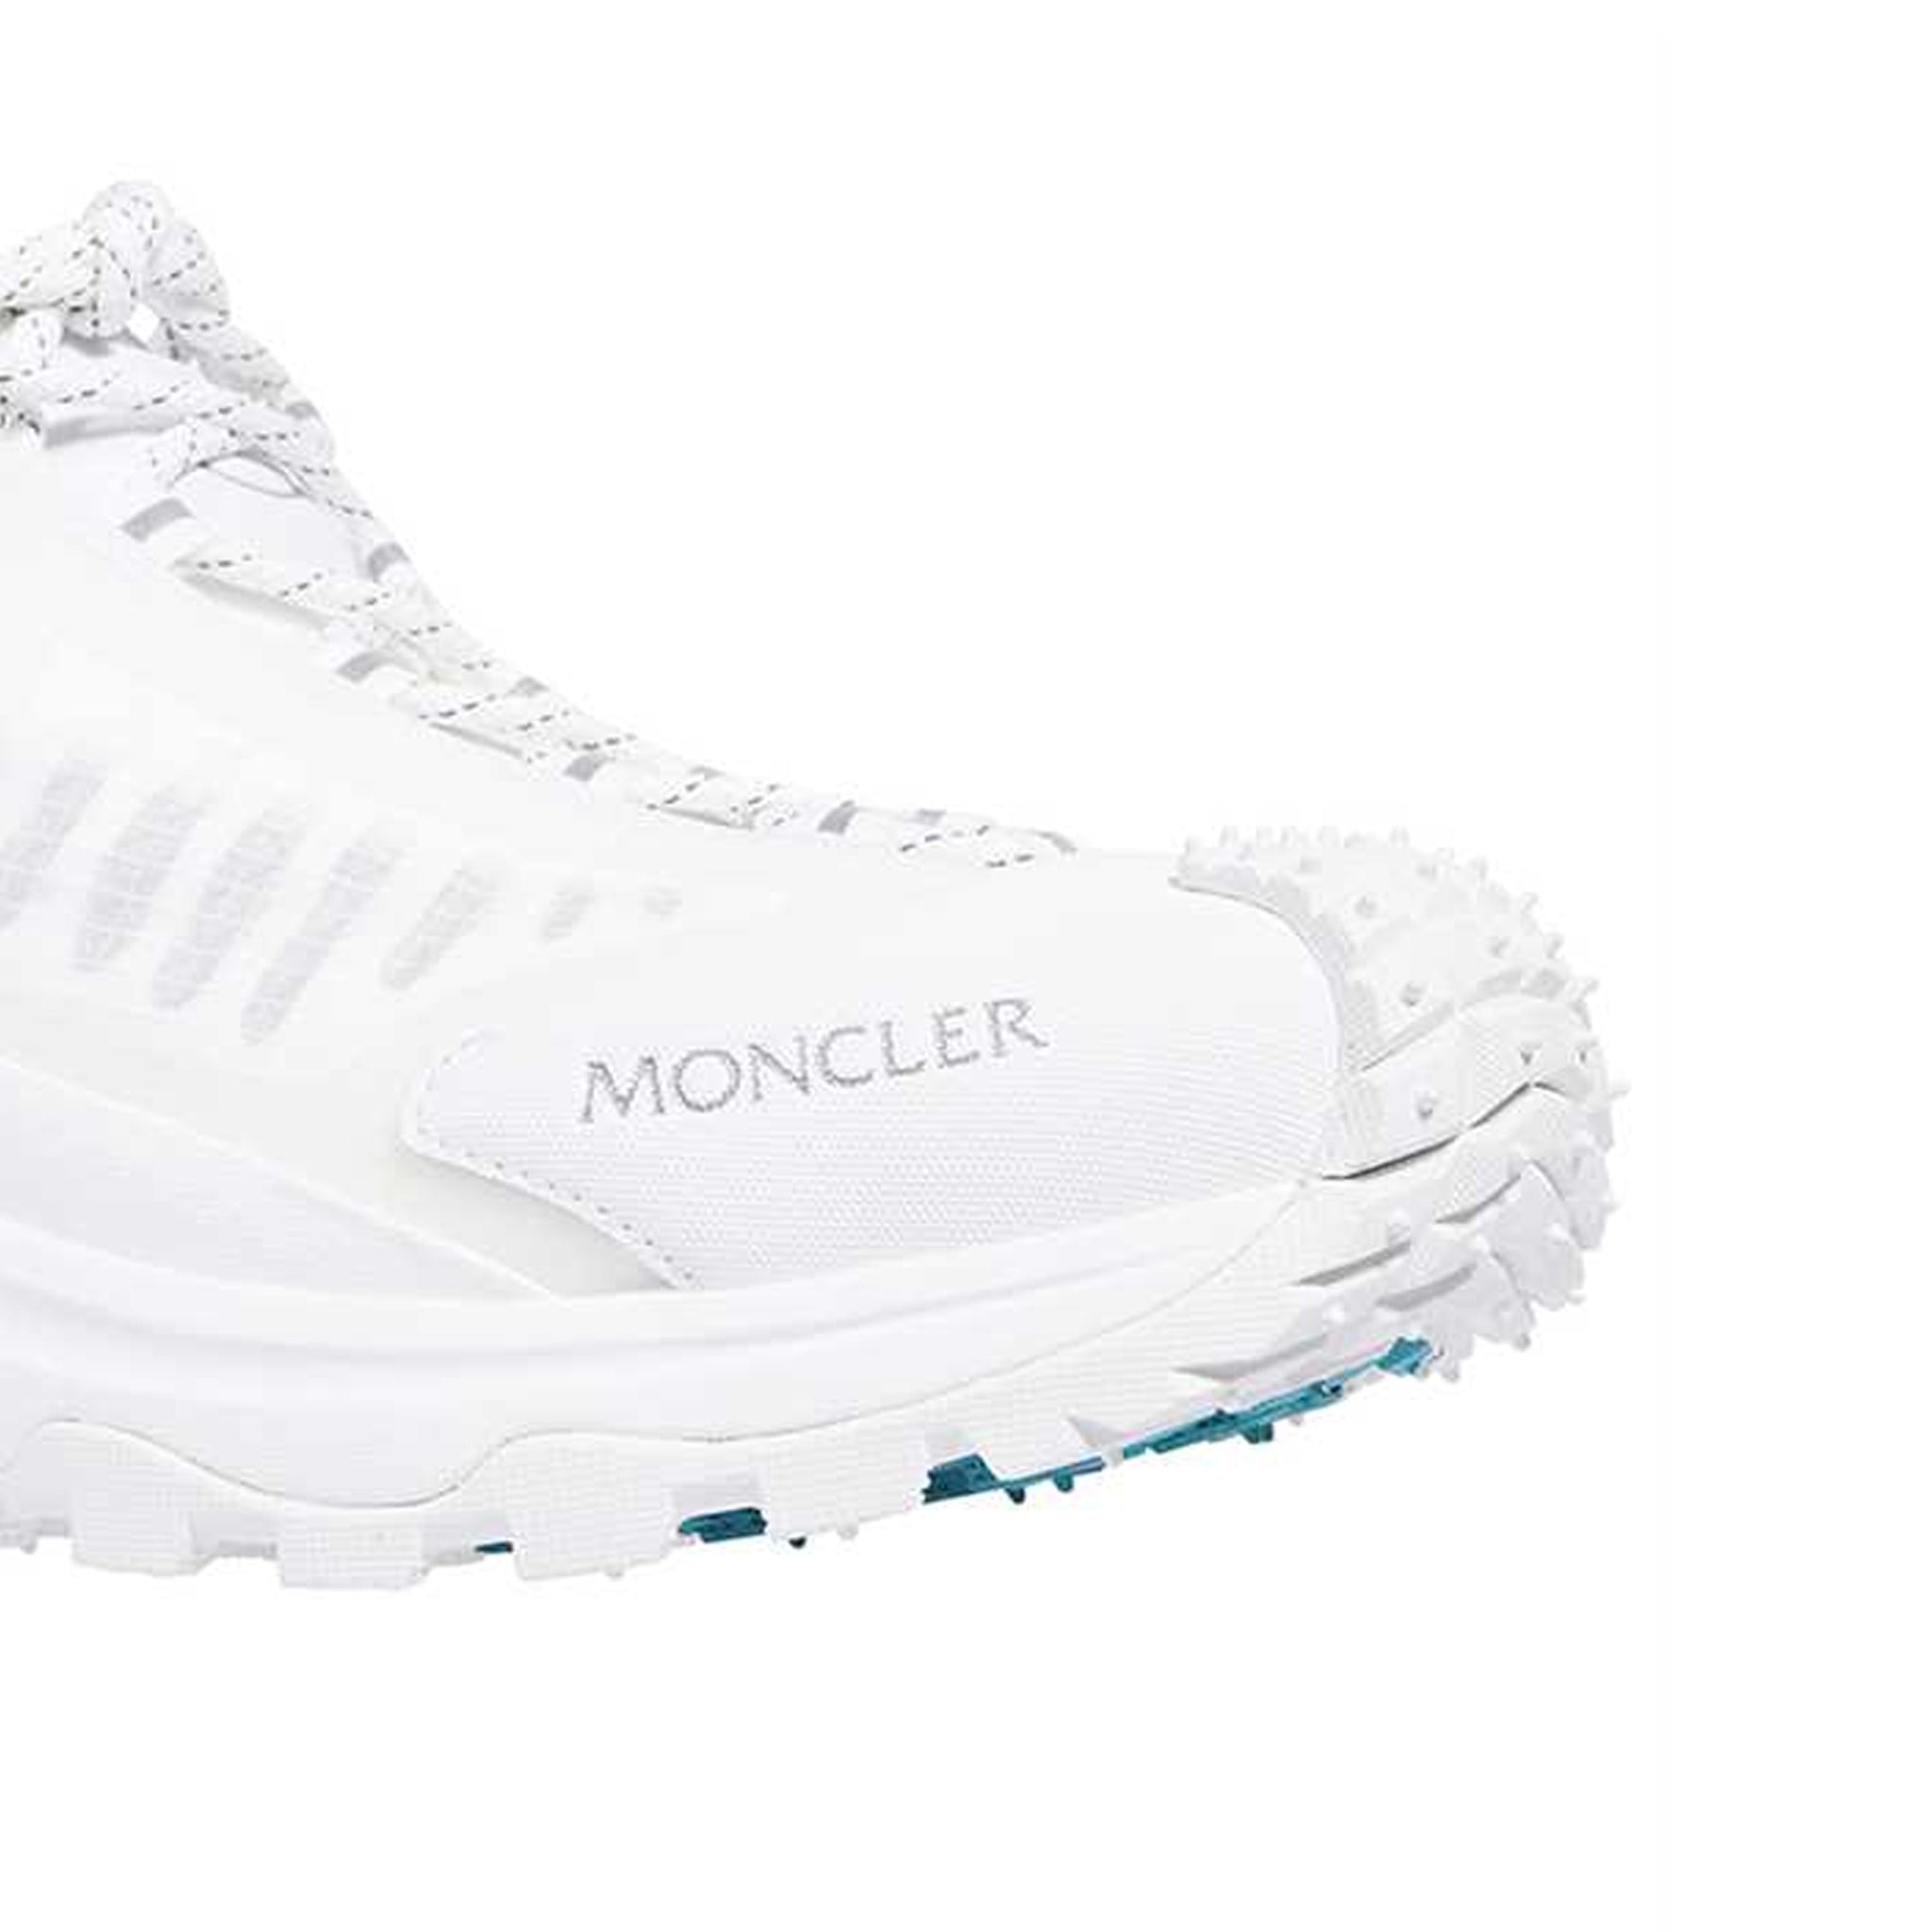 MONCLER-OUTLET-SALE-Moncler-Trailgrip-Lite-Sneakers-Sneakers-ARCHIVE-COLLECTION-4.jpg